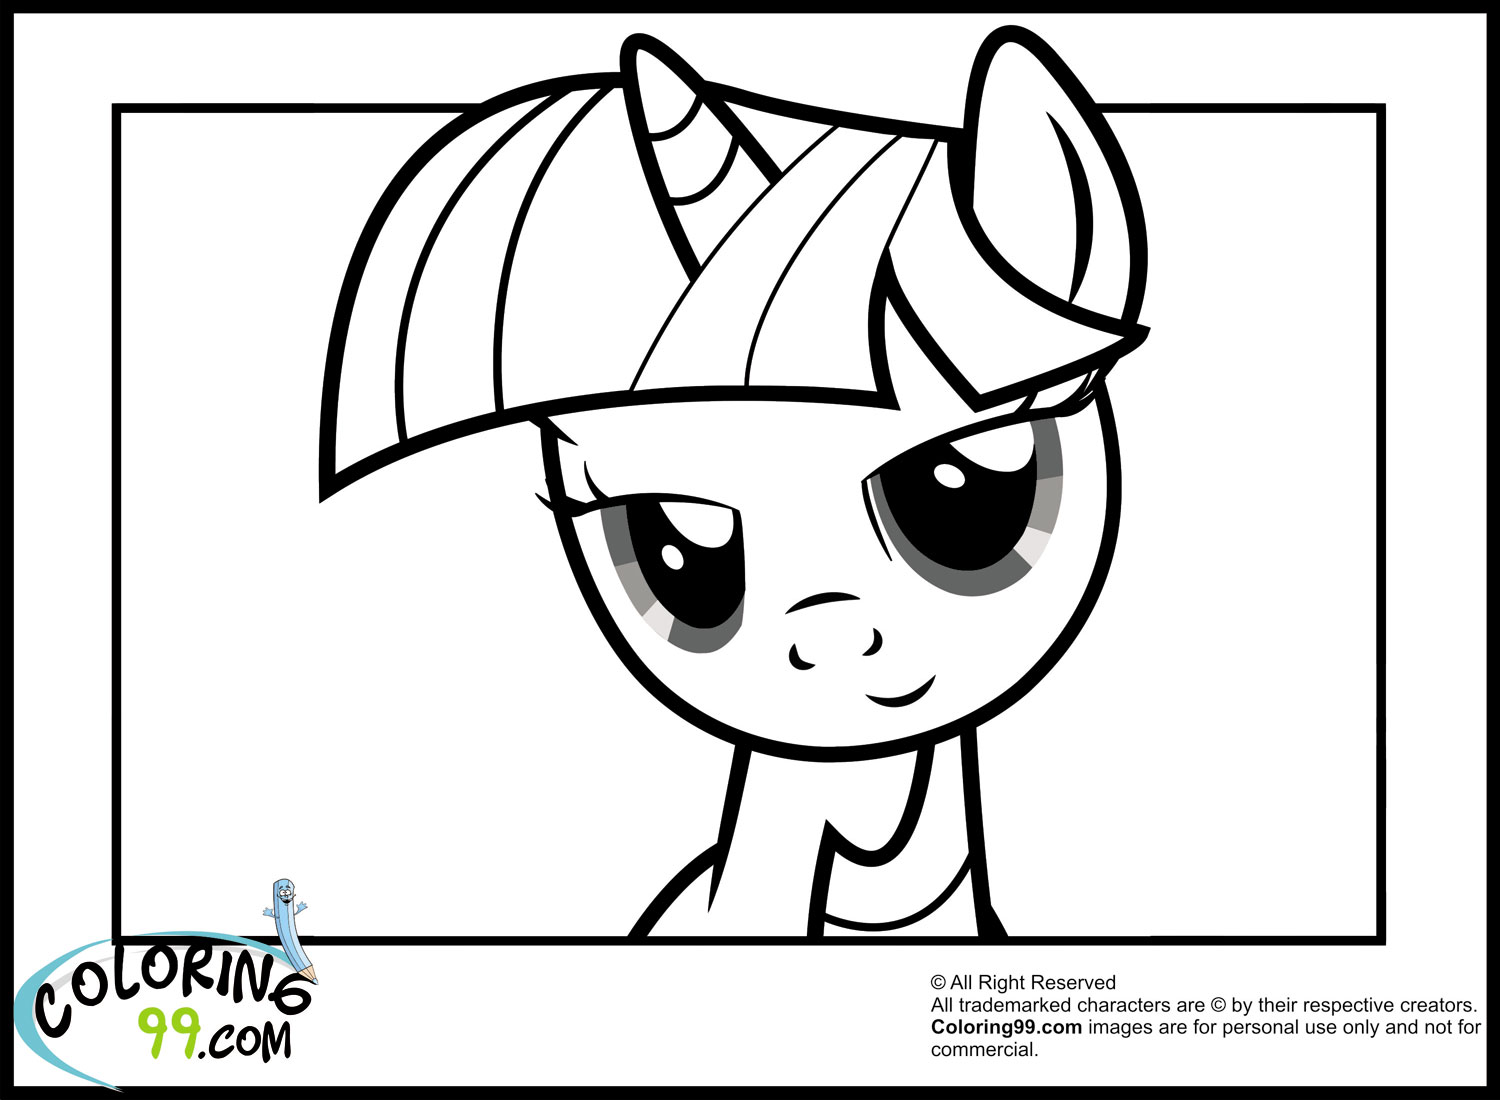 My Little Pony Twilight Sparkle Coloring Pages | Team colors